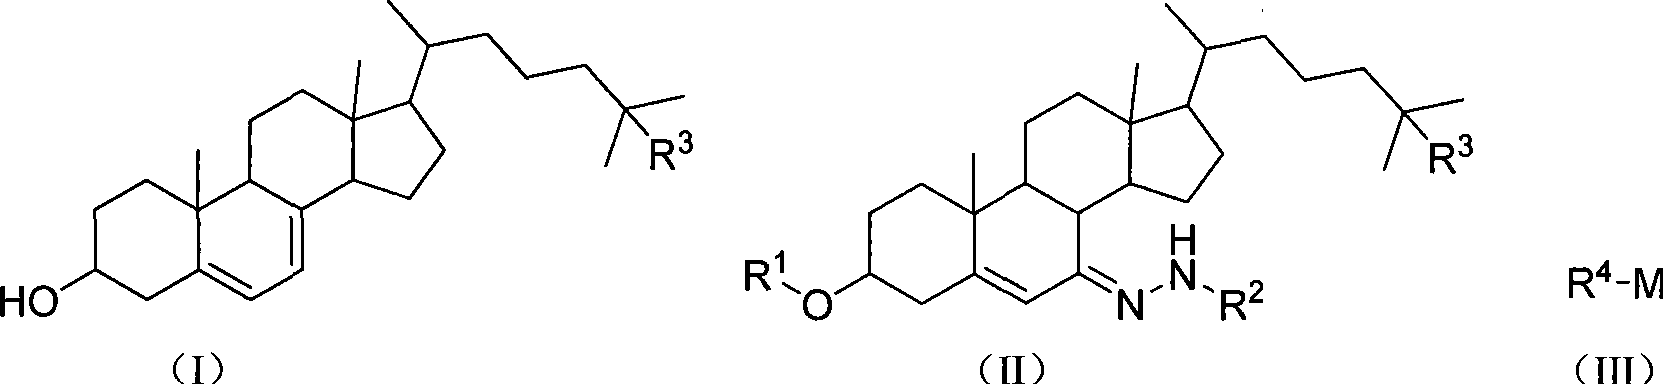 Chemical synthesis method of 5,7-diene steroids compounds